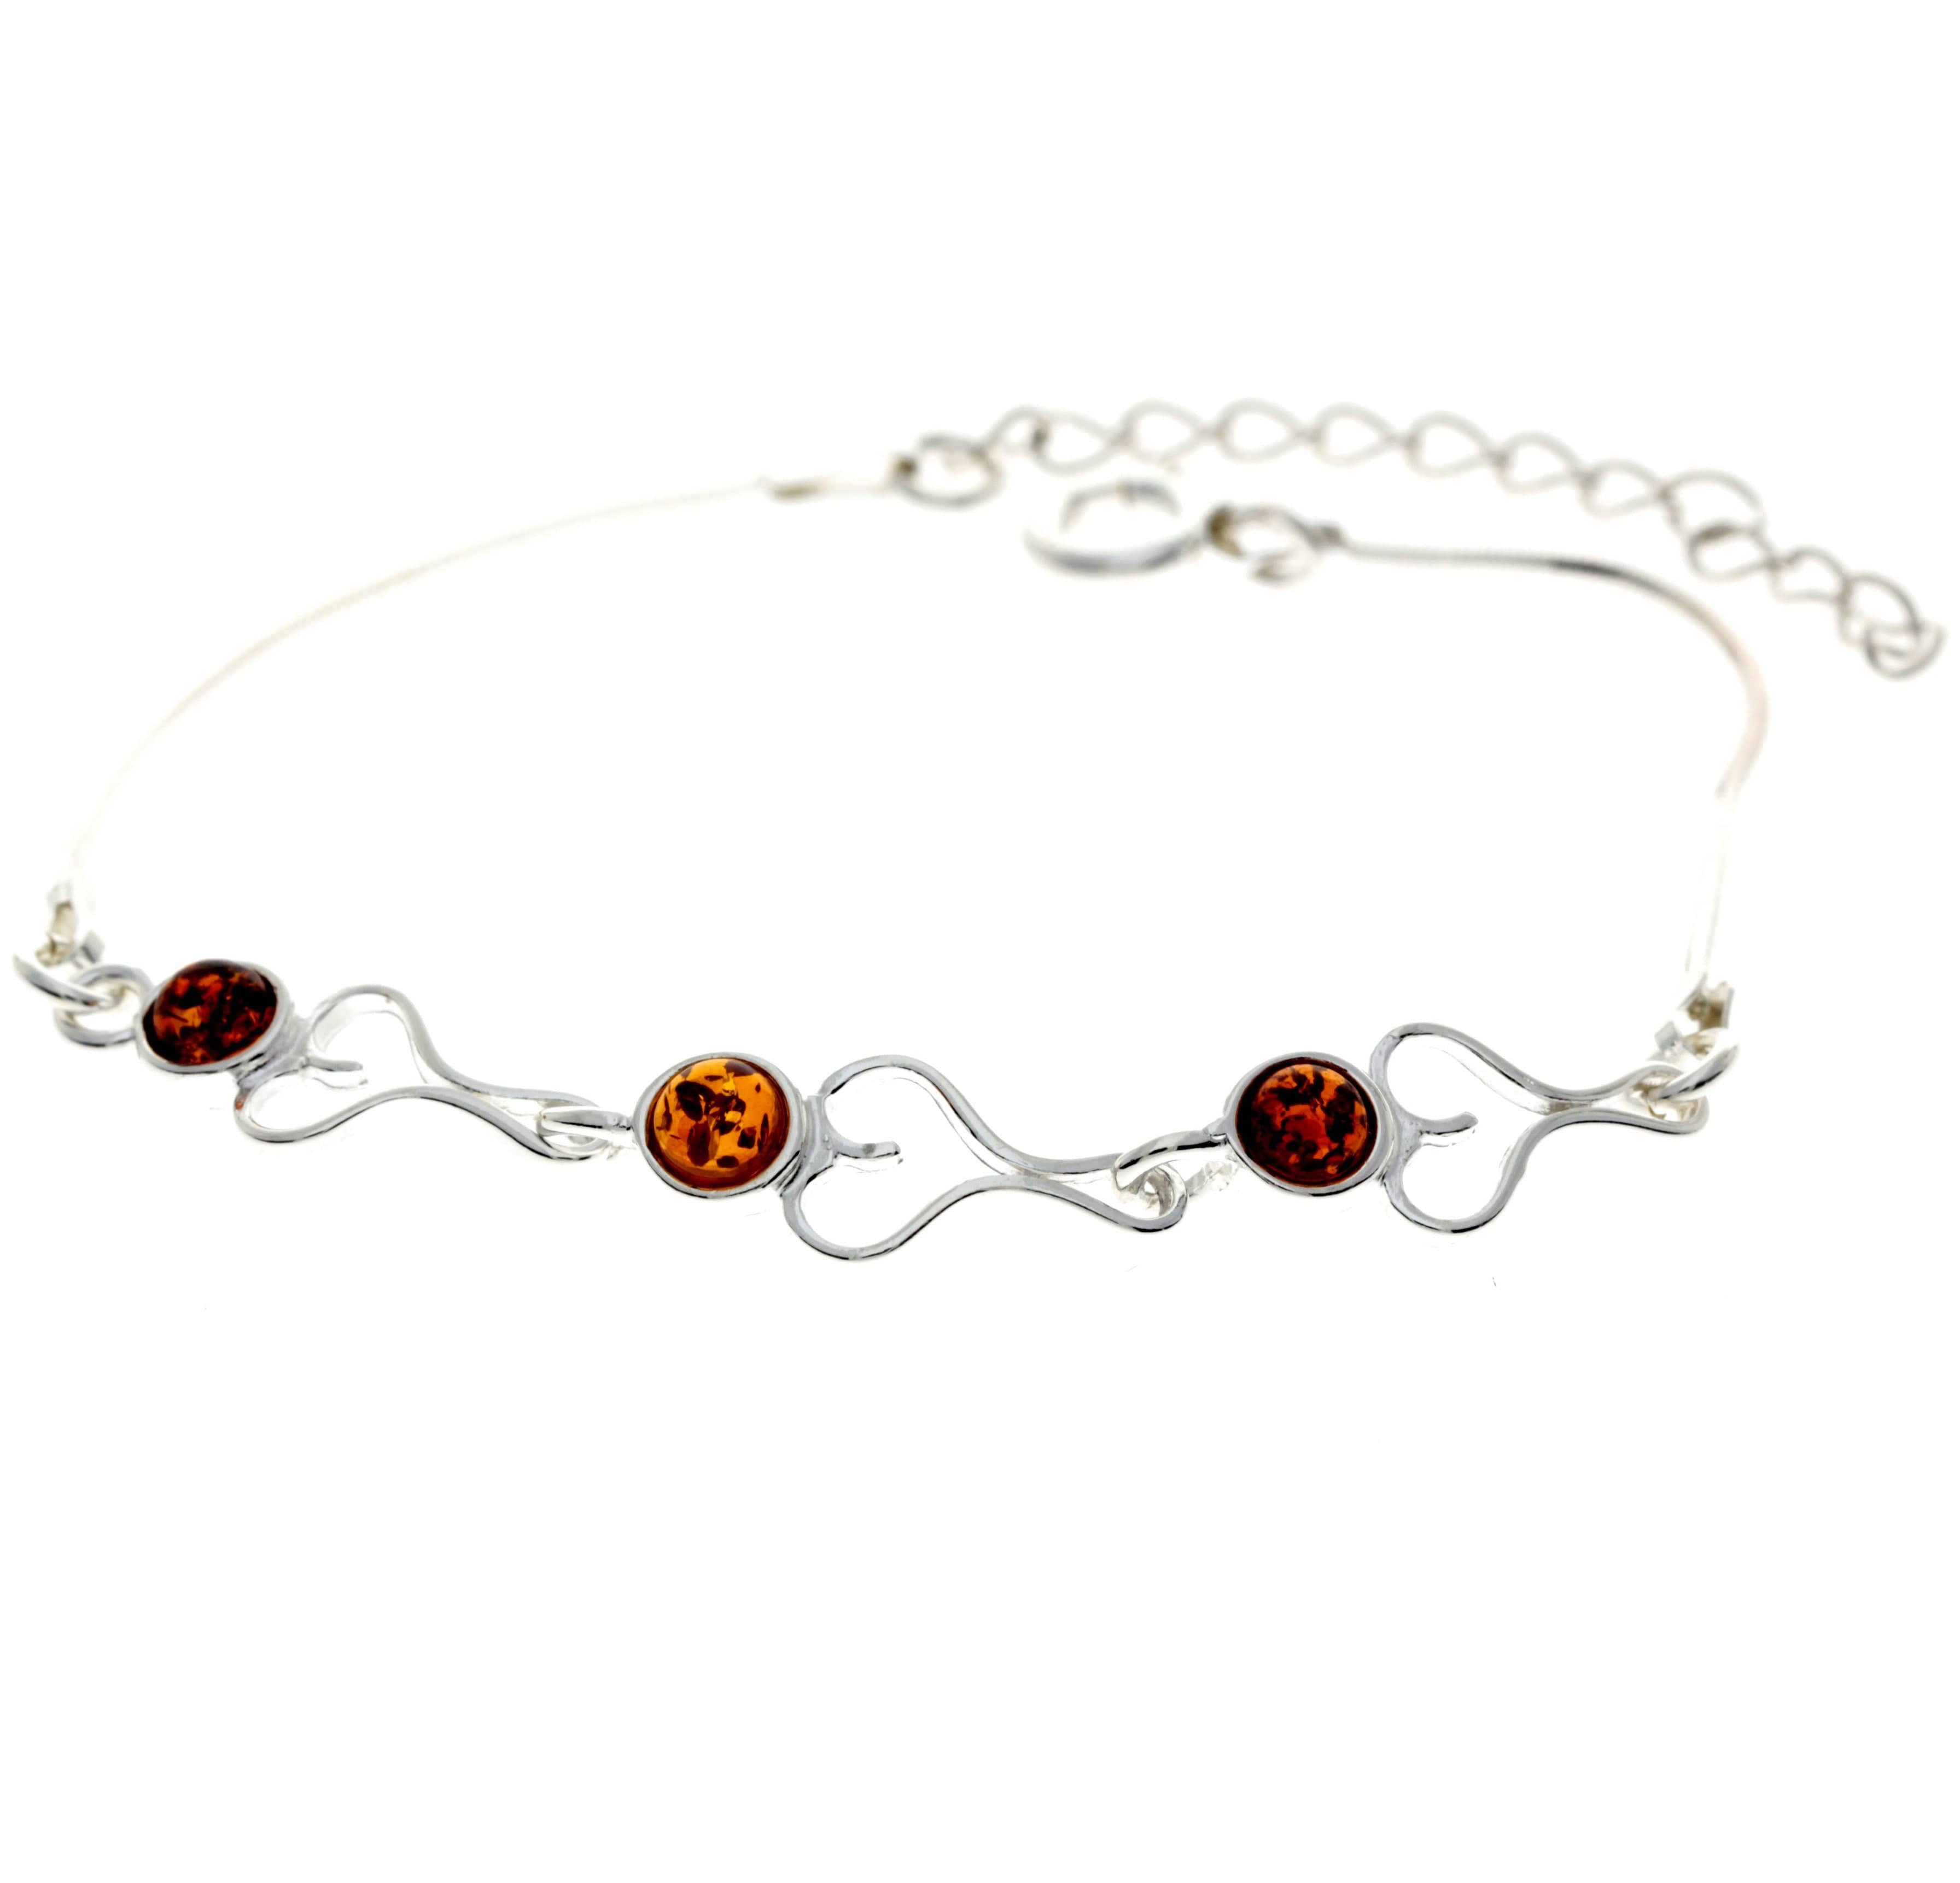 925 Sterling Silver & Baltic Amber Adjustable Bracelet with Silver Hearts - M569